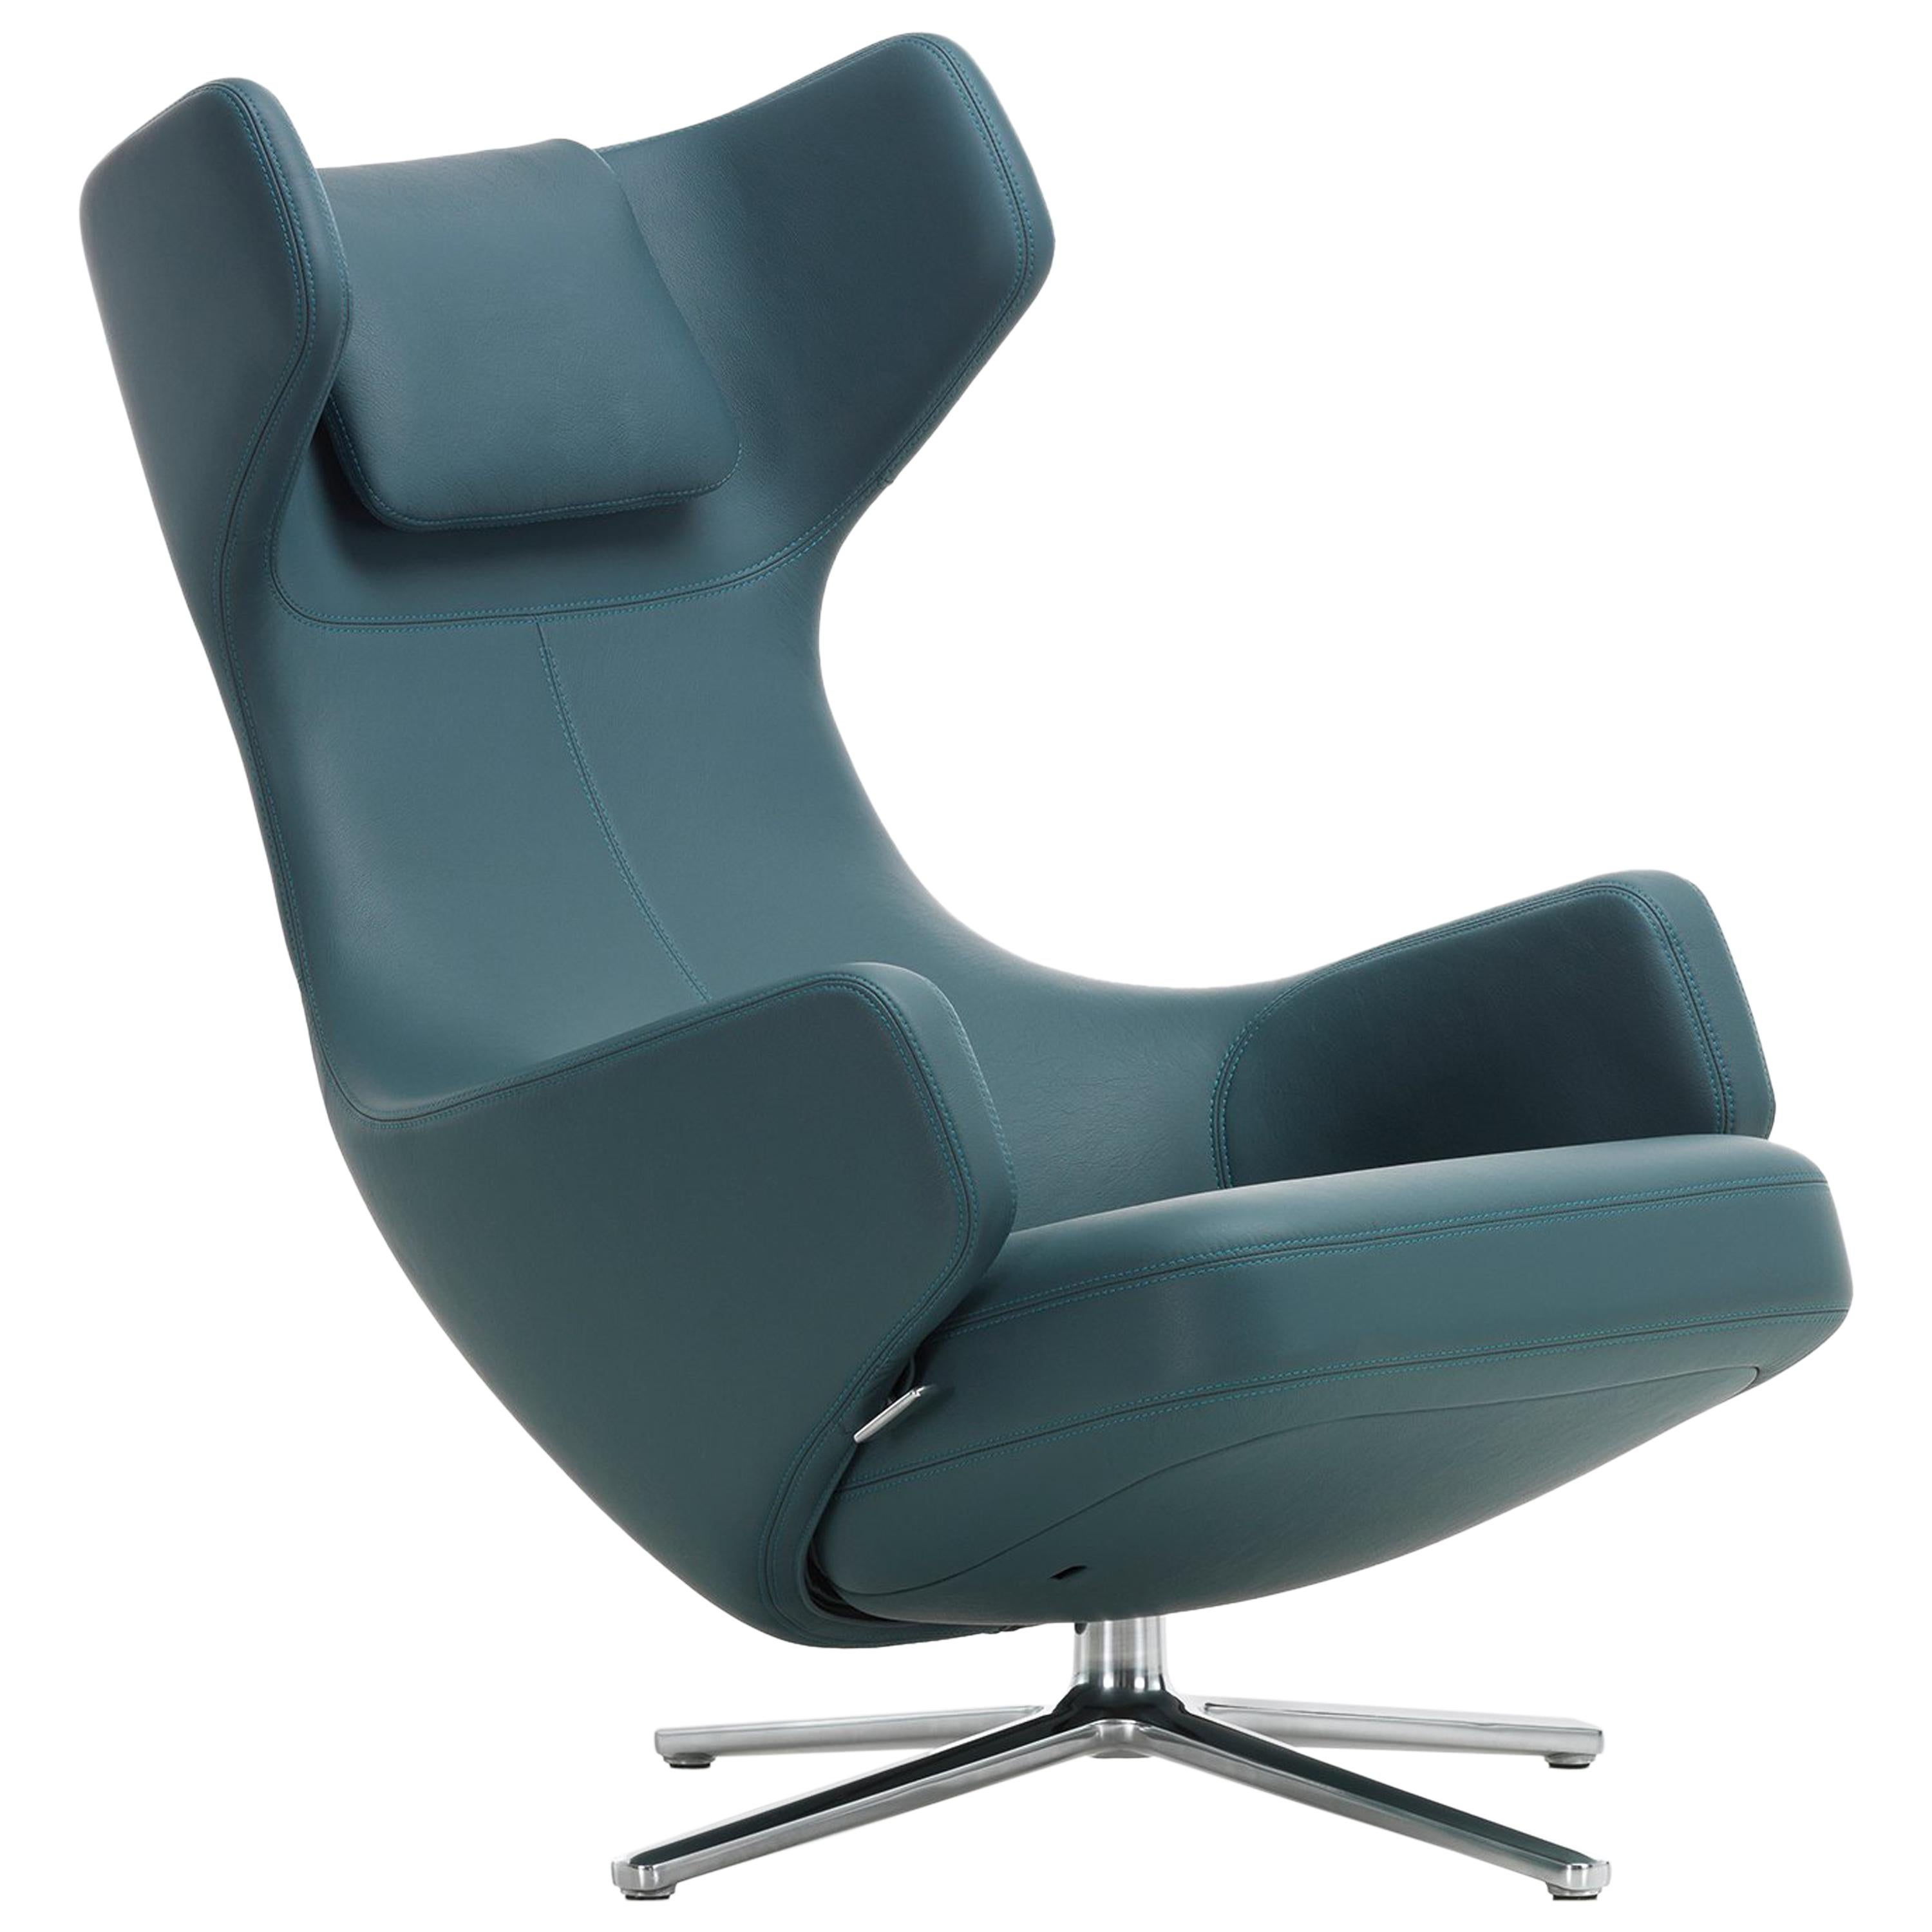 Vitra Grand Repos Lounge Chair in Smoke Blue Leather Premium by Antonio Citterio For Sale